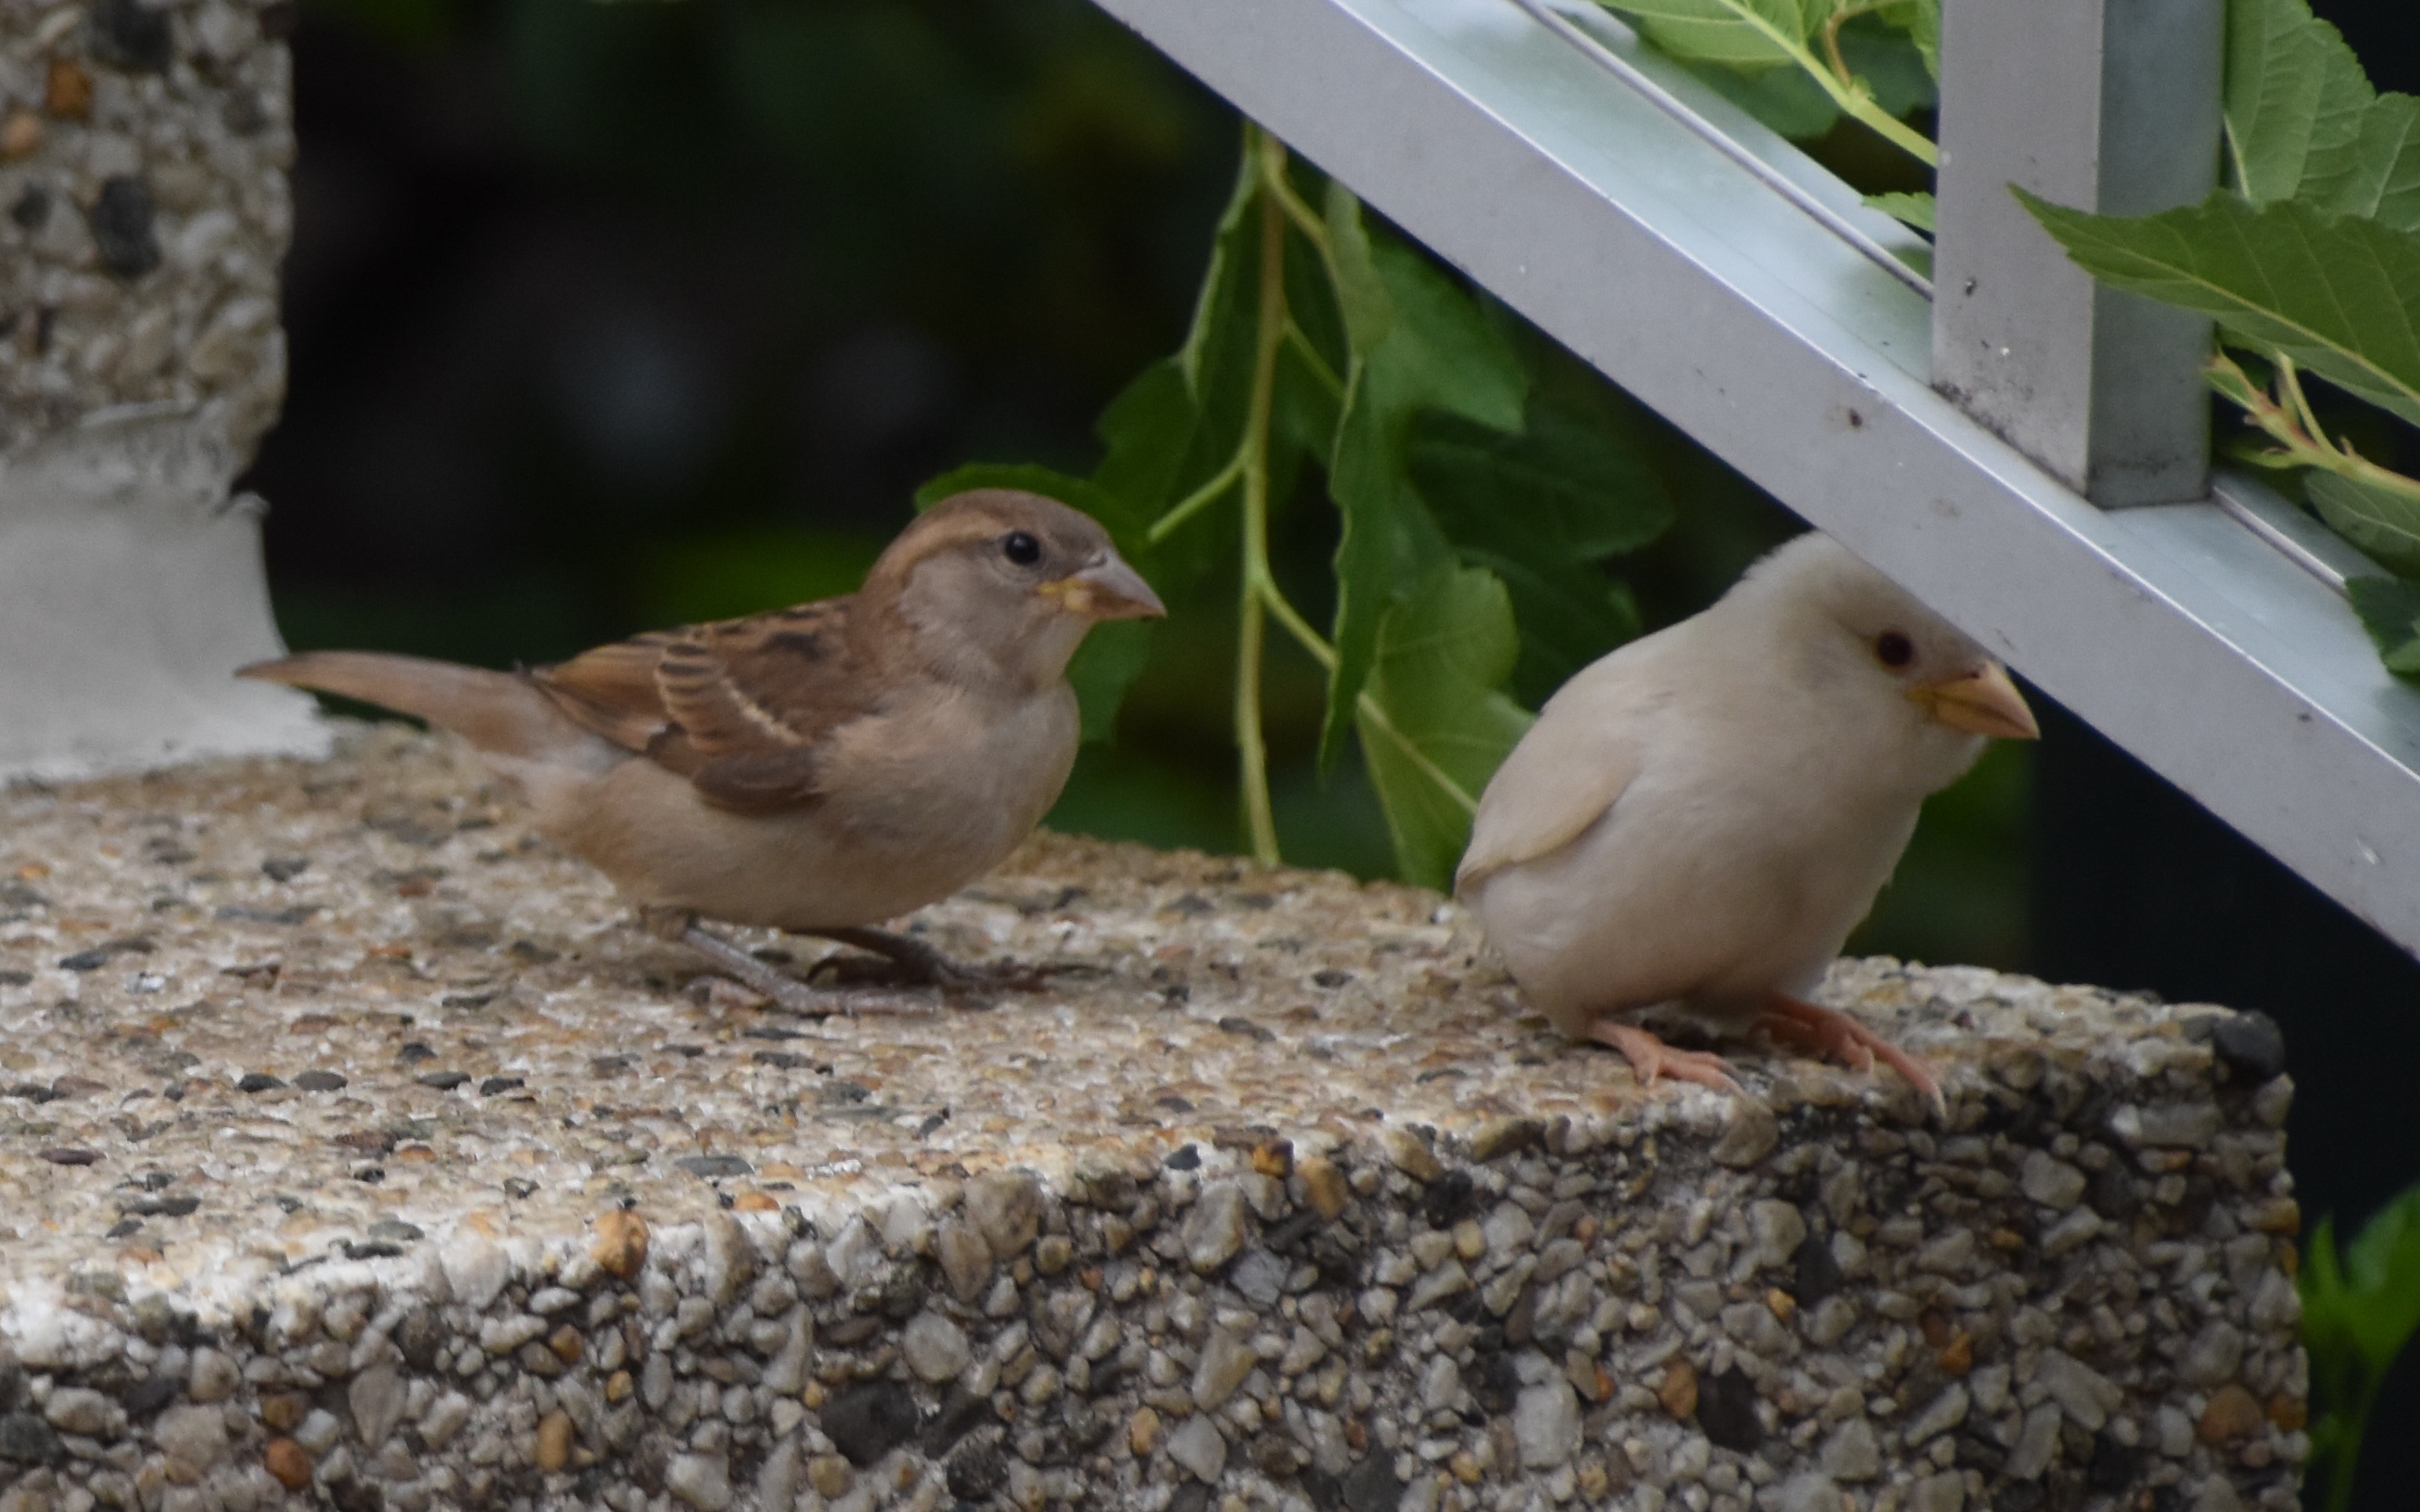 Two small birds, one with dark brown feathers and a light brown belly, the other all white.